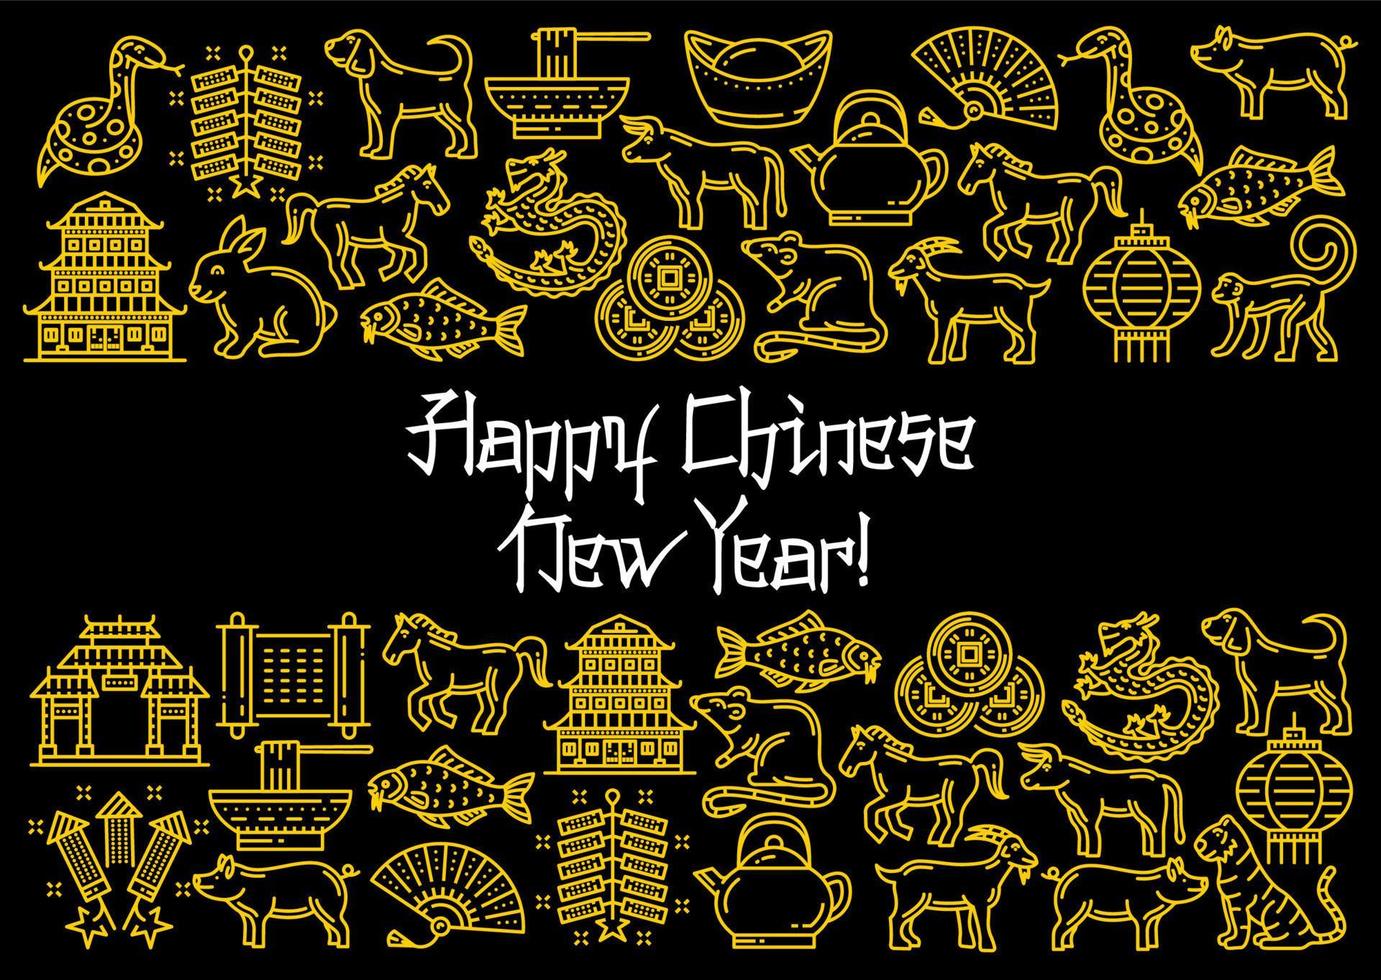 Chinese Lunar New Year poster, vector